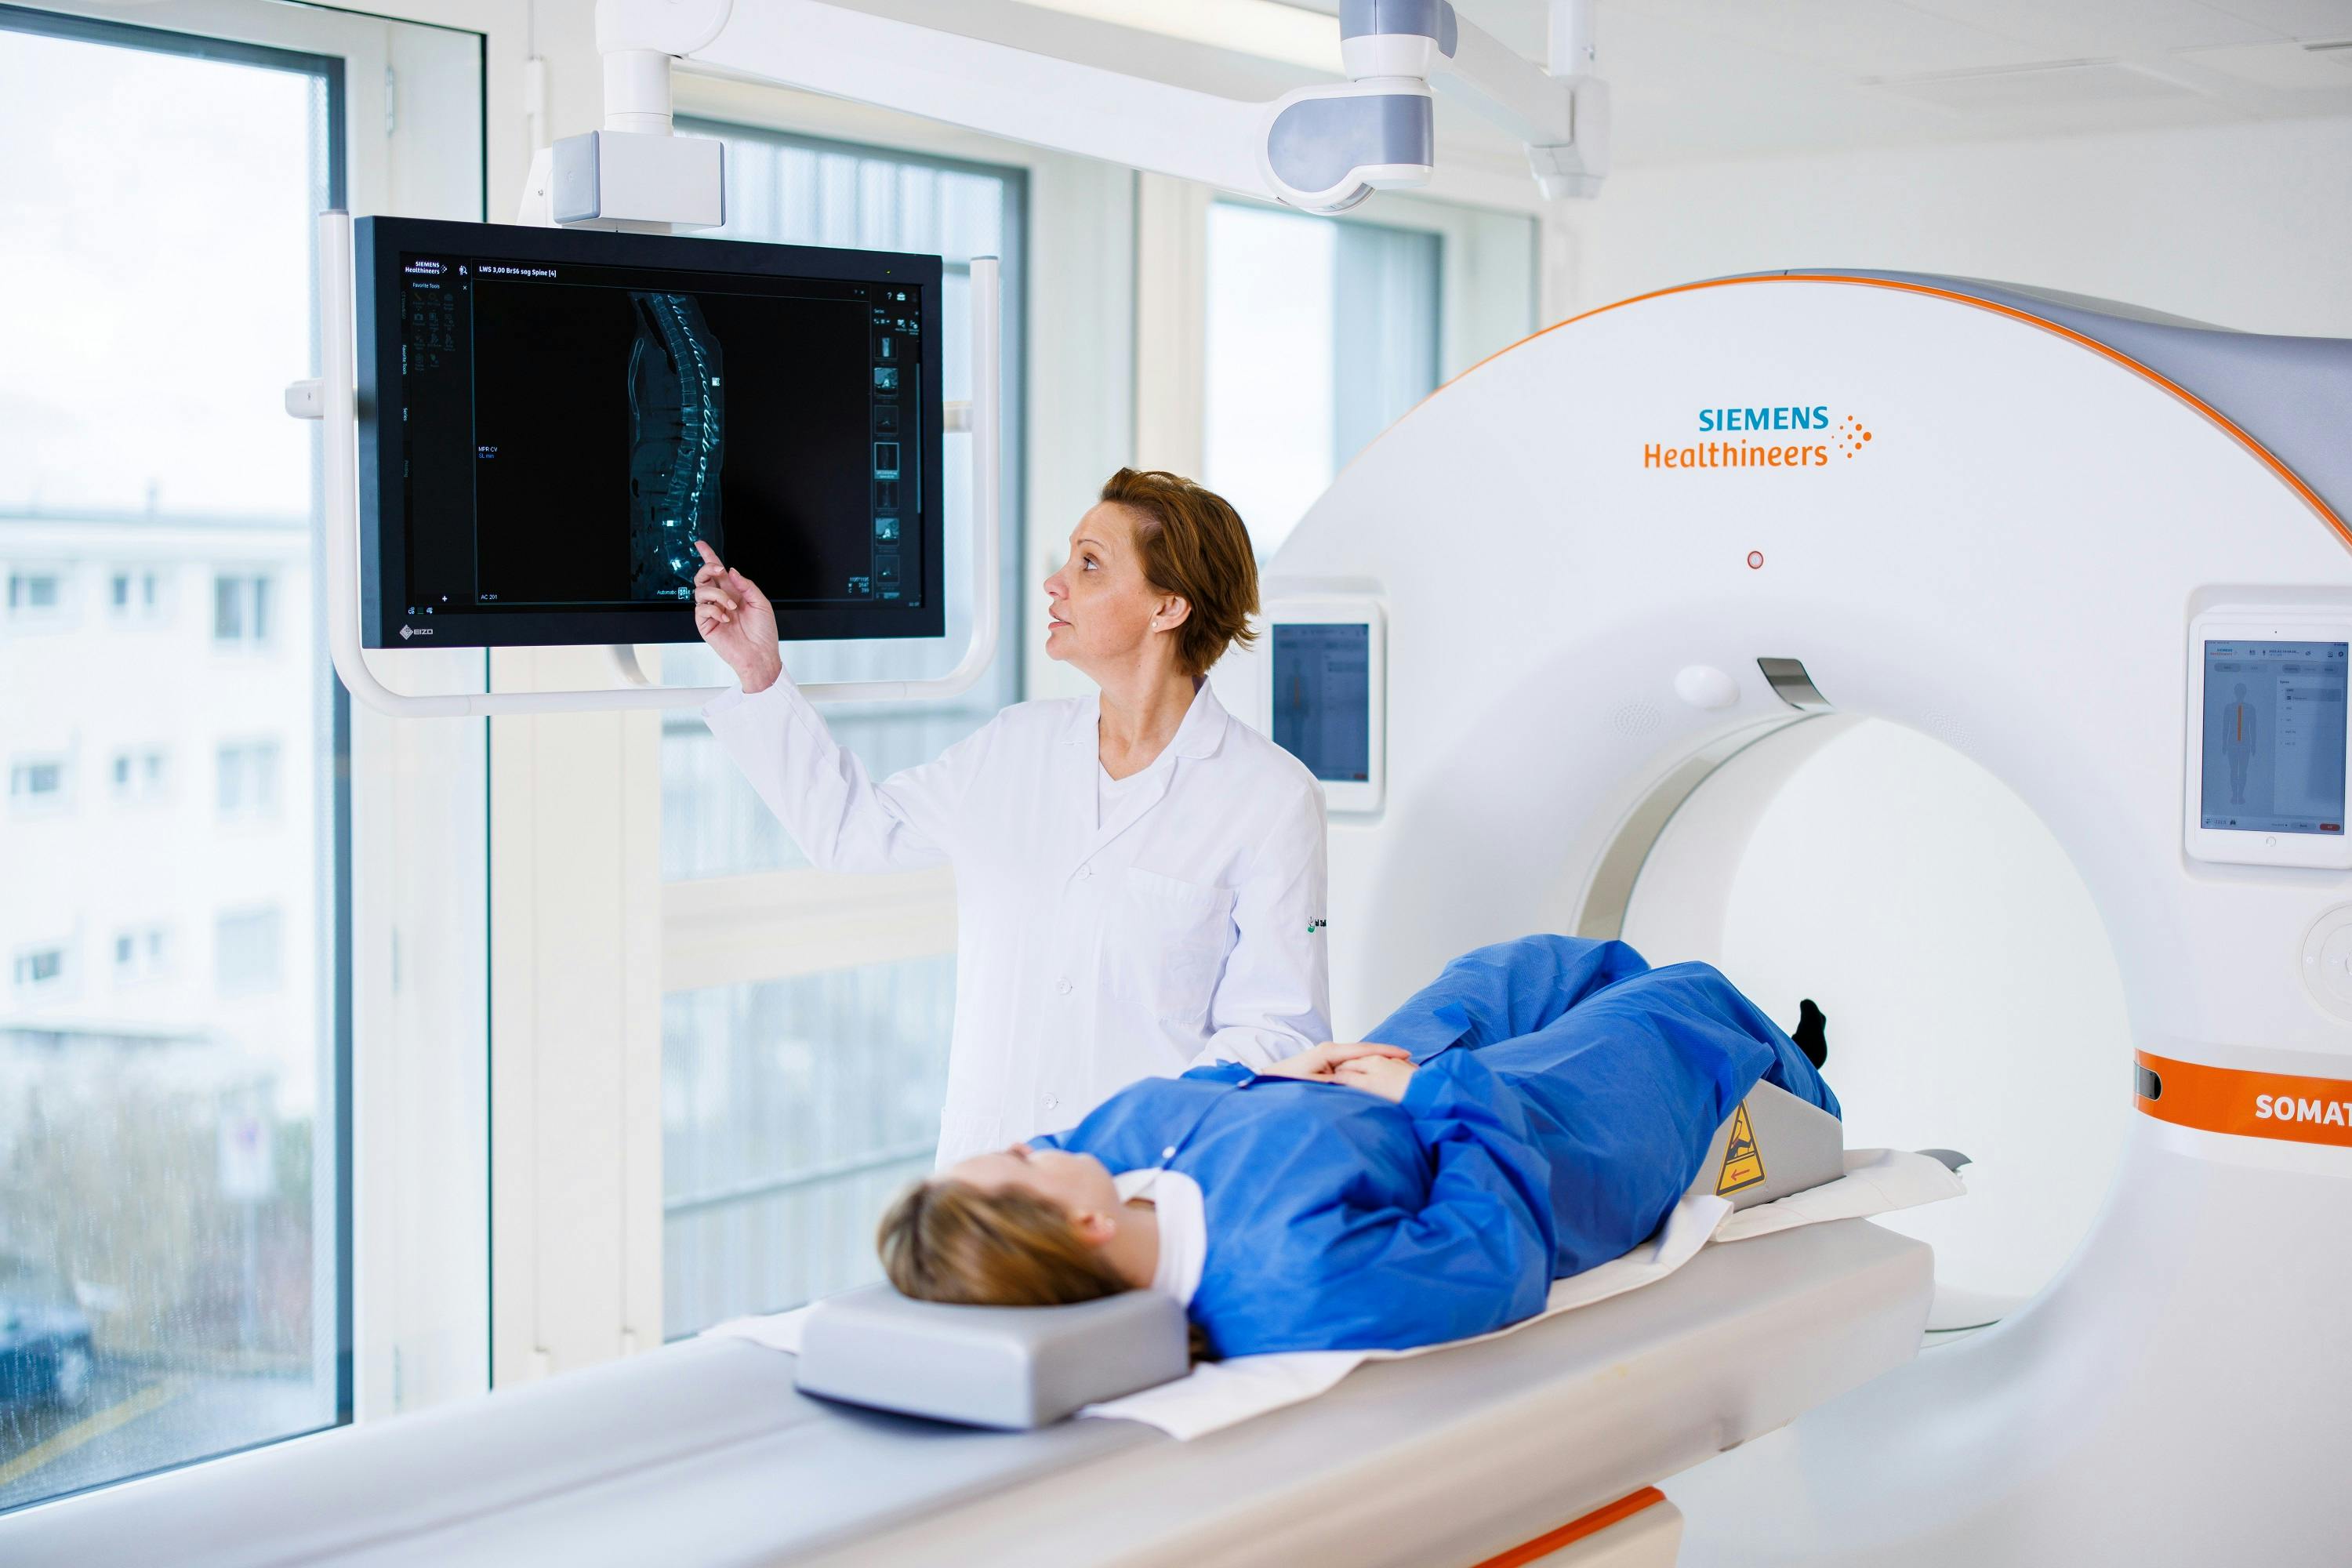 Medical specialist looks at X-ray image next to patient in MRI machine from Siemens Healthineers.